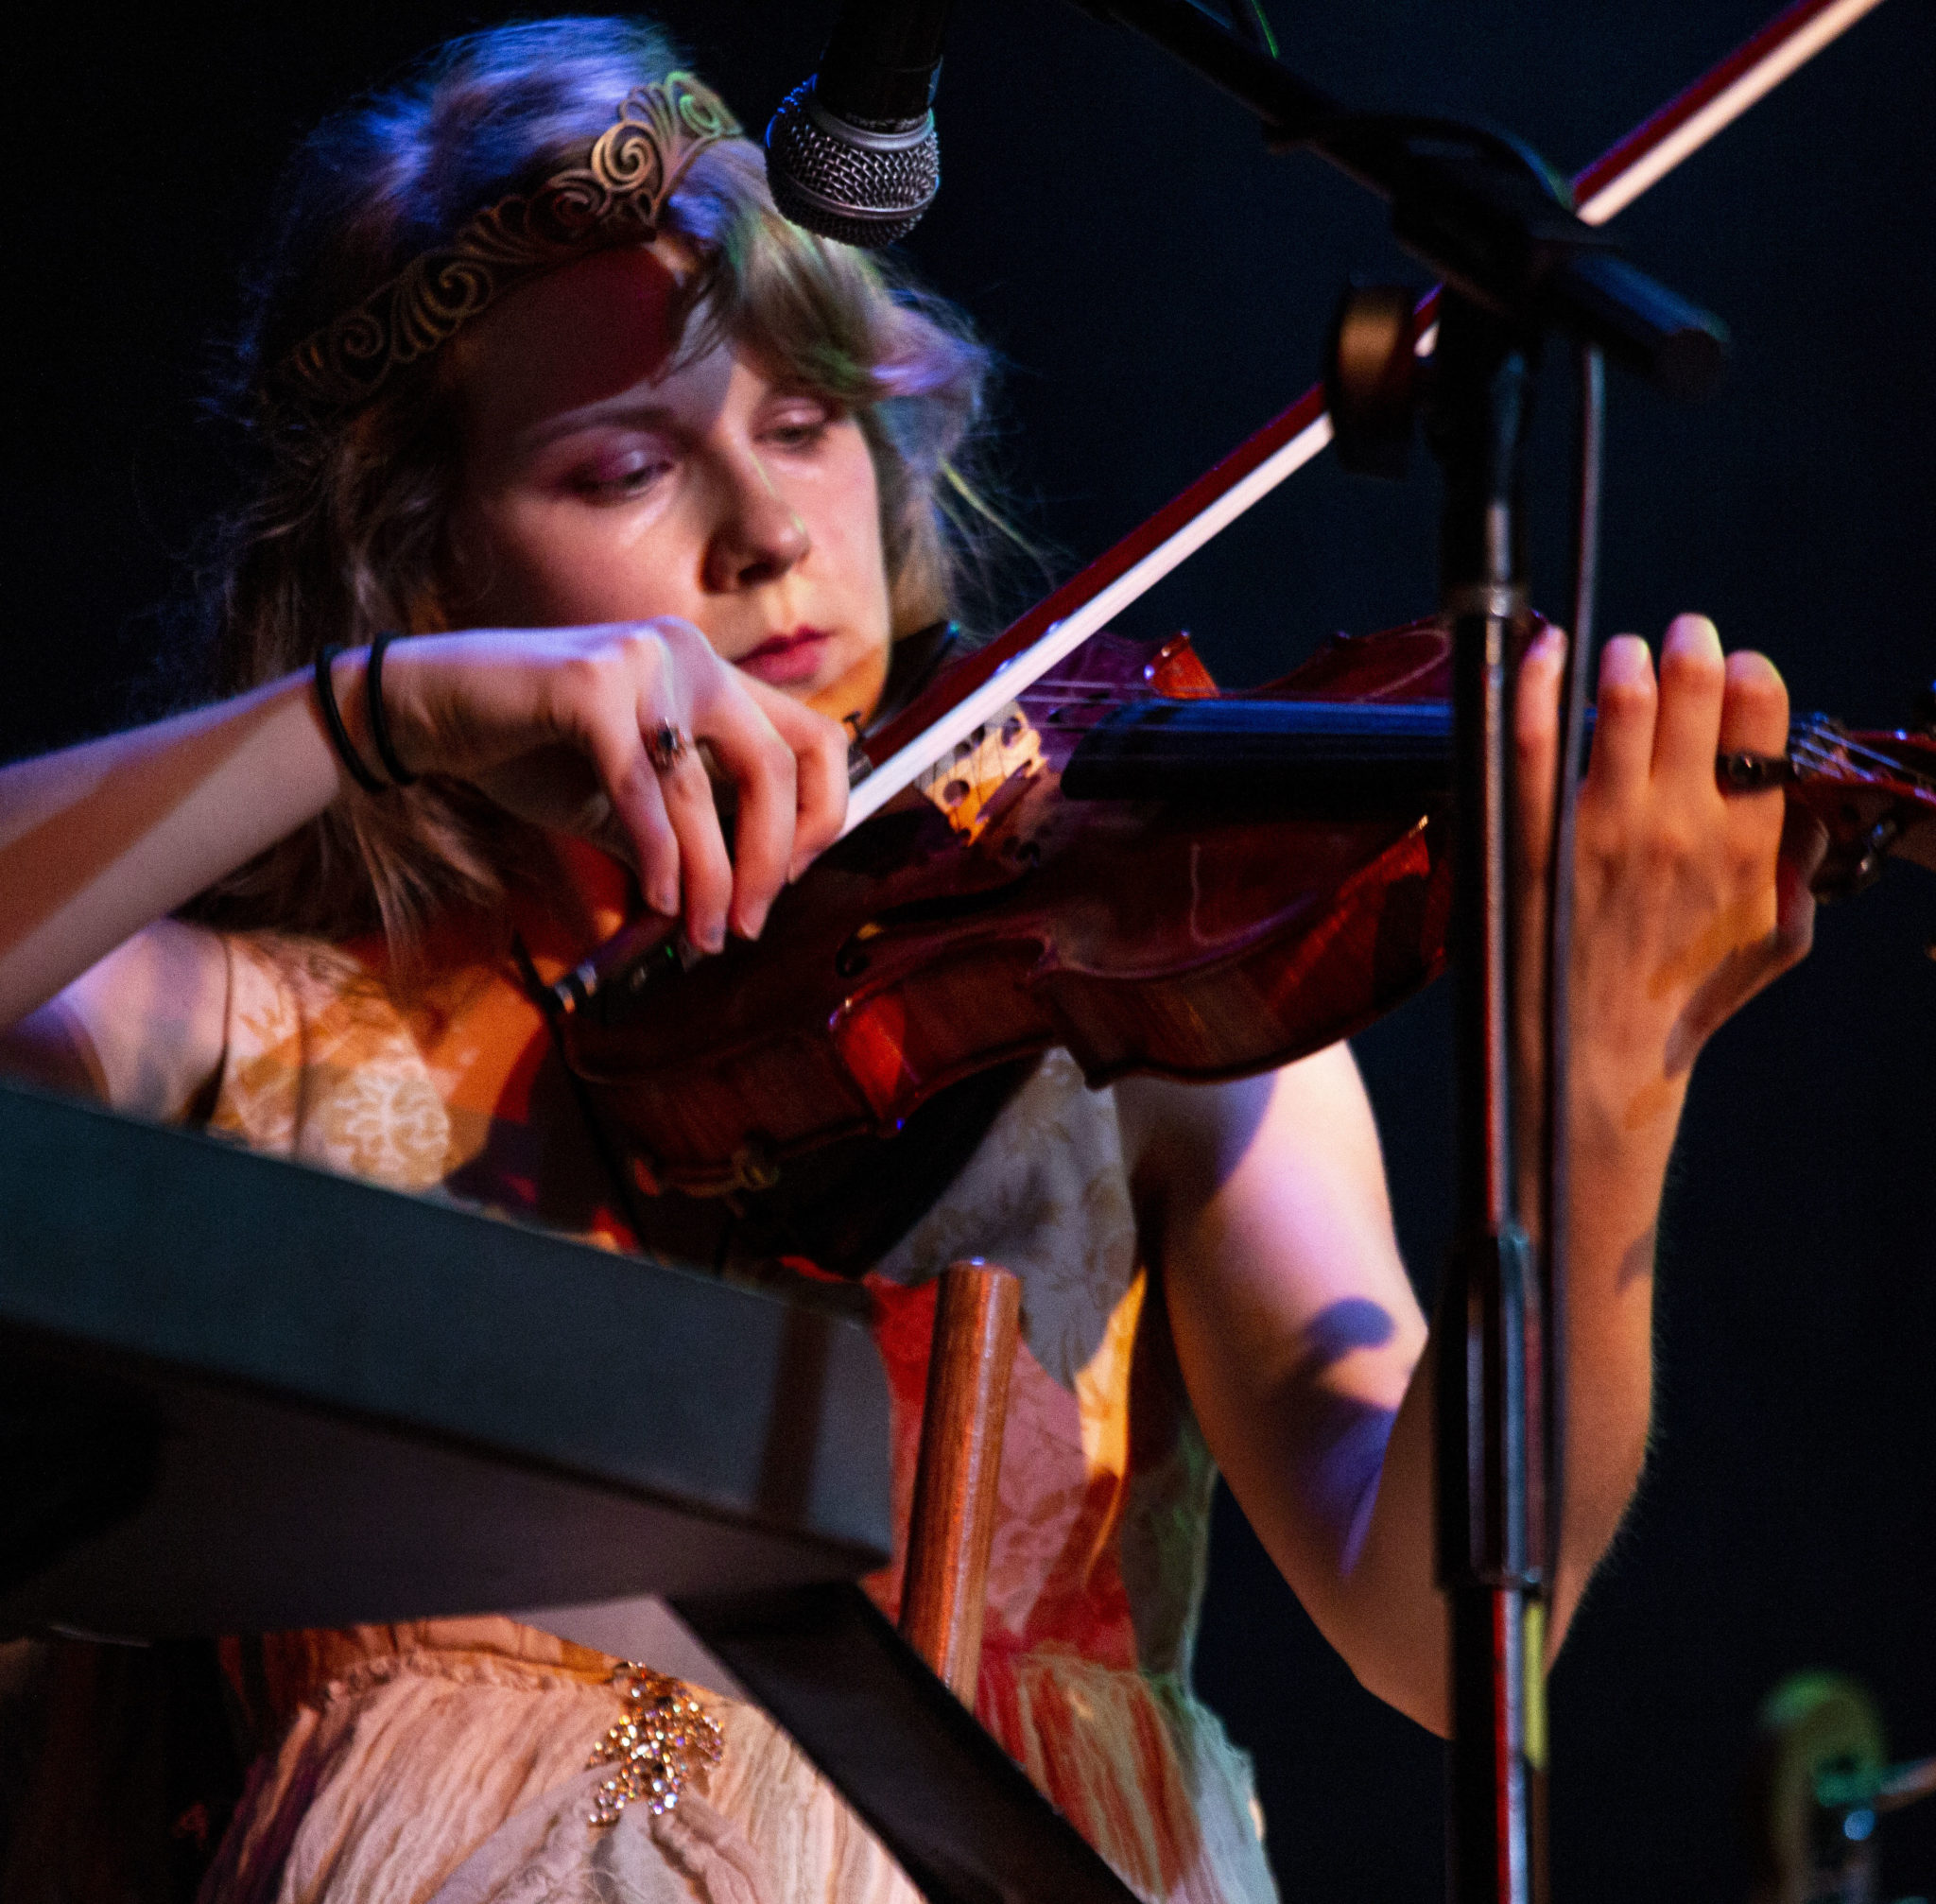 A violinist, their eyes focused on the bow, pulls it across the strings near their chin. The shadows from different lights cast warm and cool colors across their face and arms.